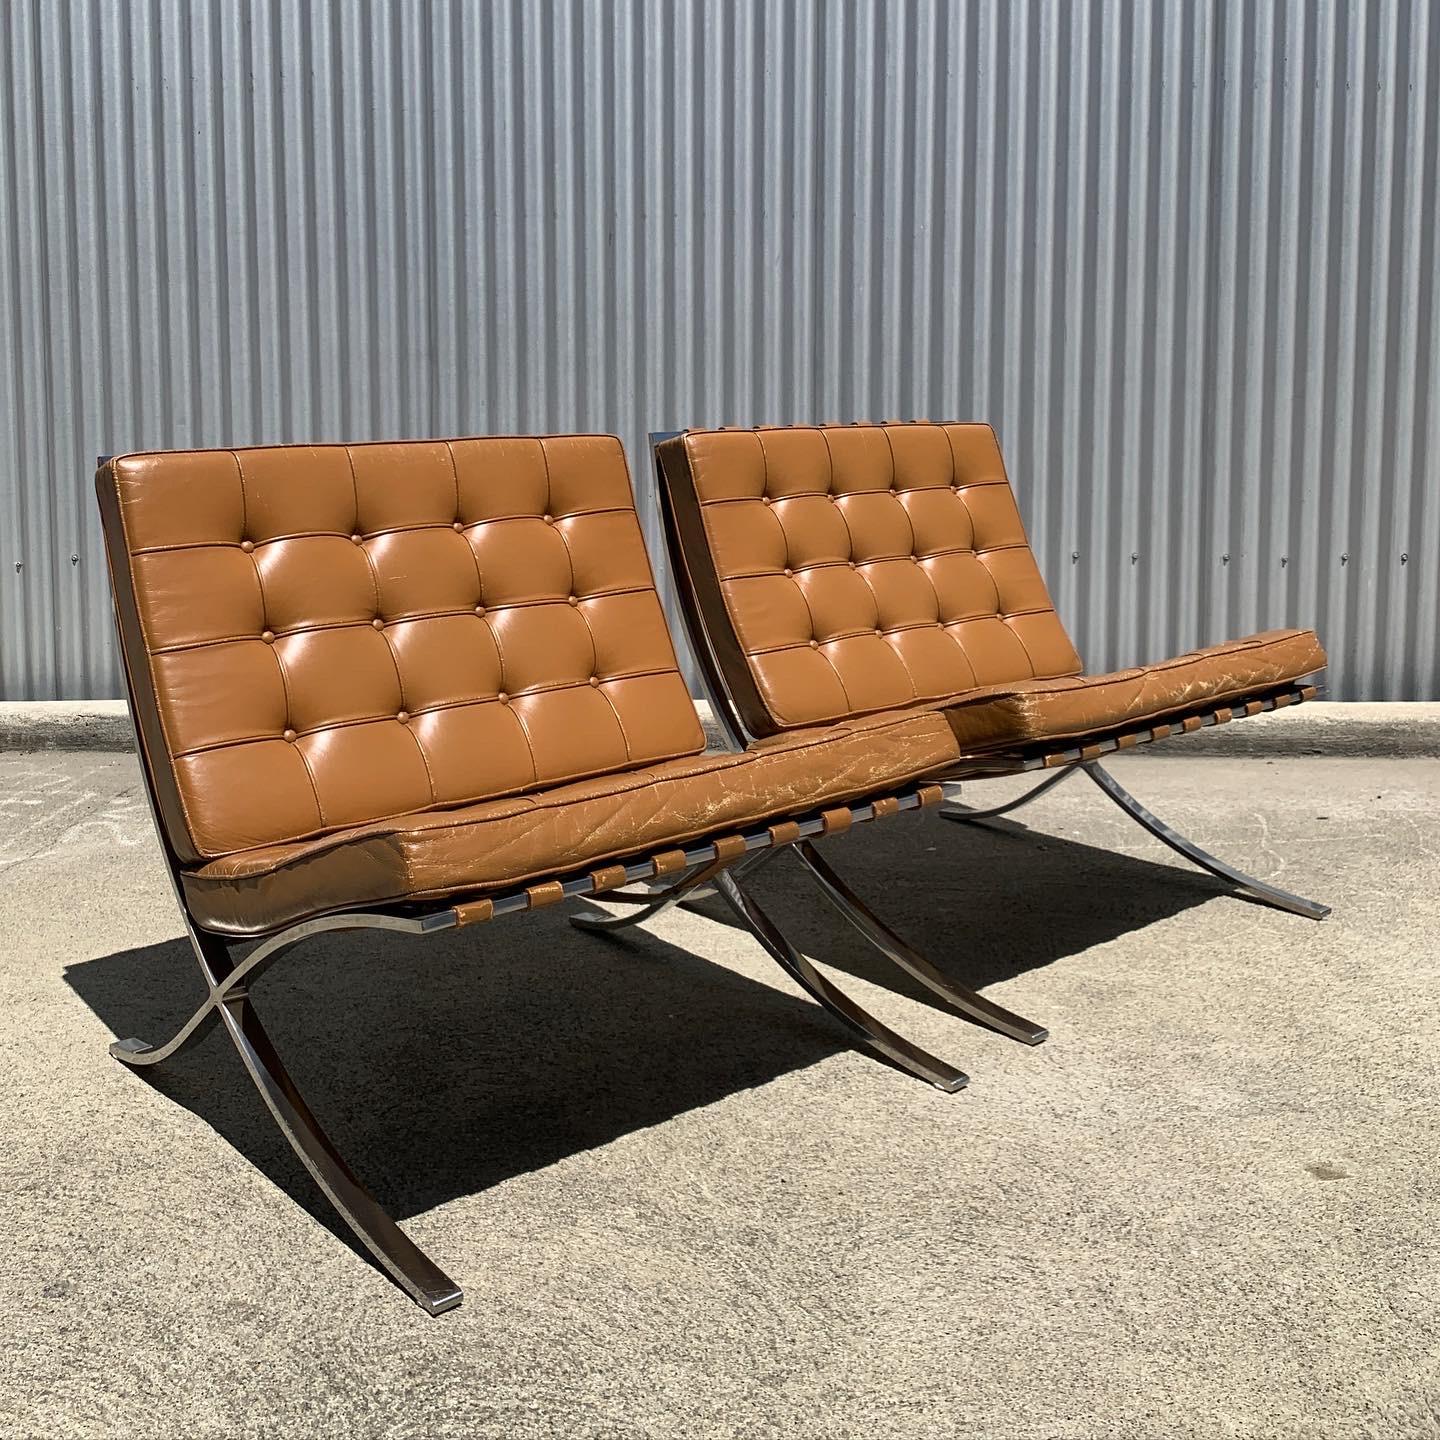 These Barcelona chairs were designed by Mies van der Rohe in 1929 and produced by Knoll International in the 1970s.

The chairs feature an incredible hand dyed cognac leather upholstery on a chrome steel base.

The chairs are in good vintage